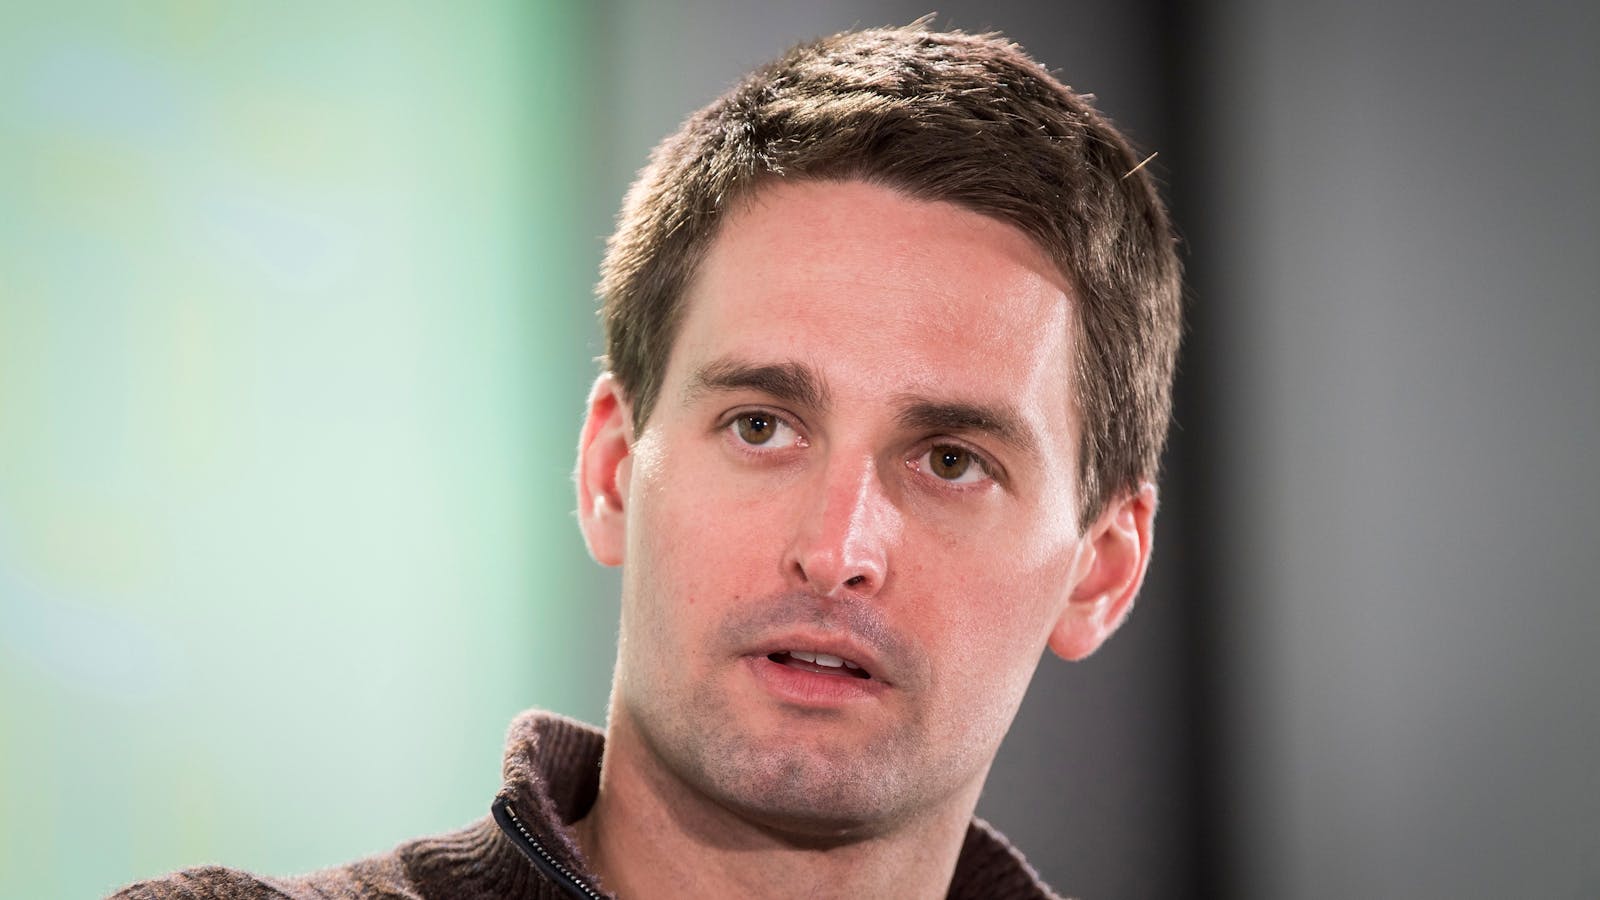 Snap CEO Evan Spiegel. Photo by Bloomberg